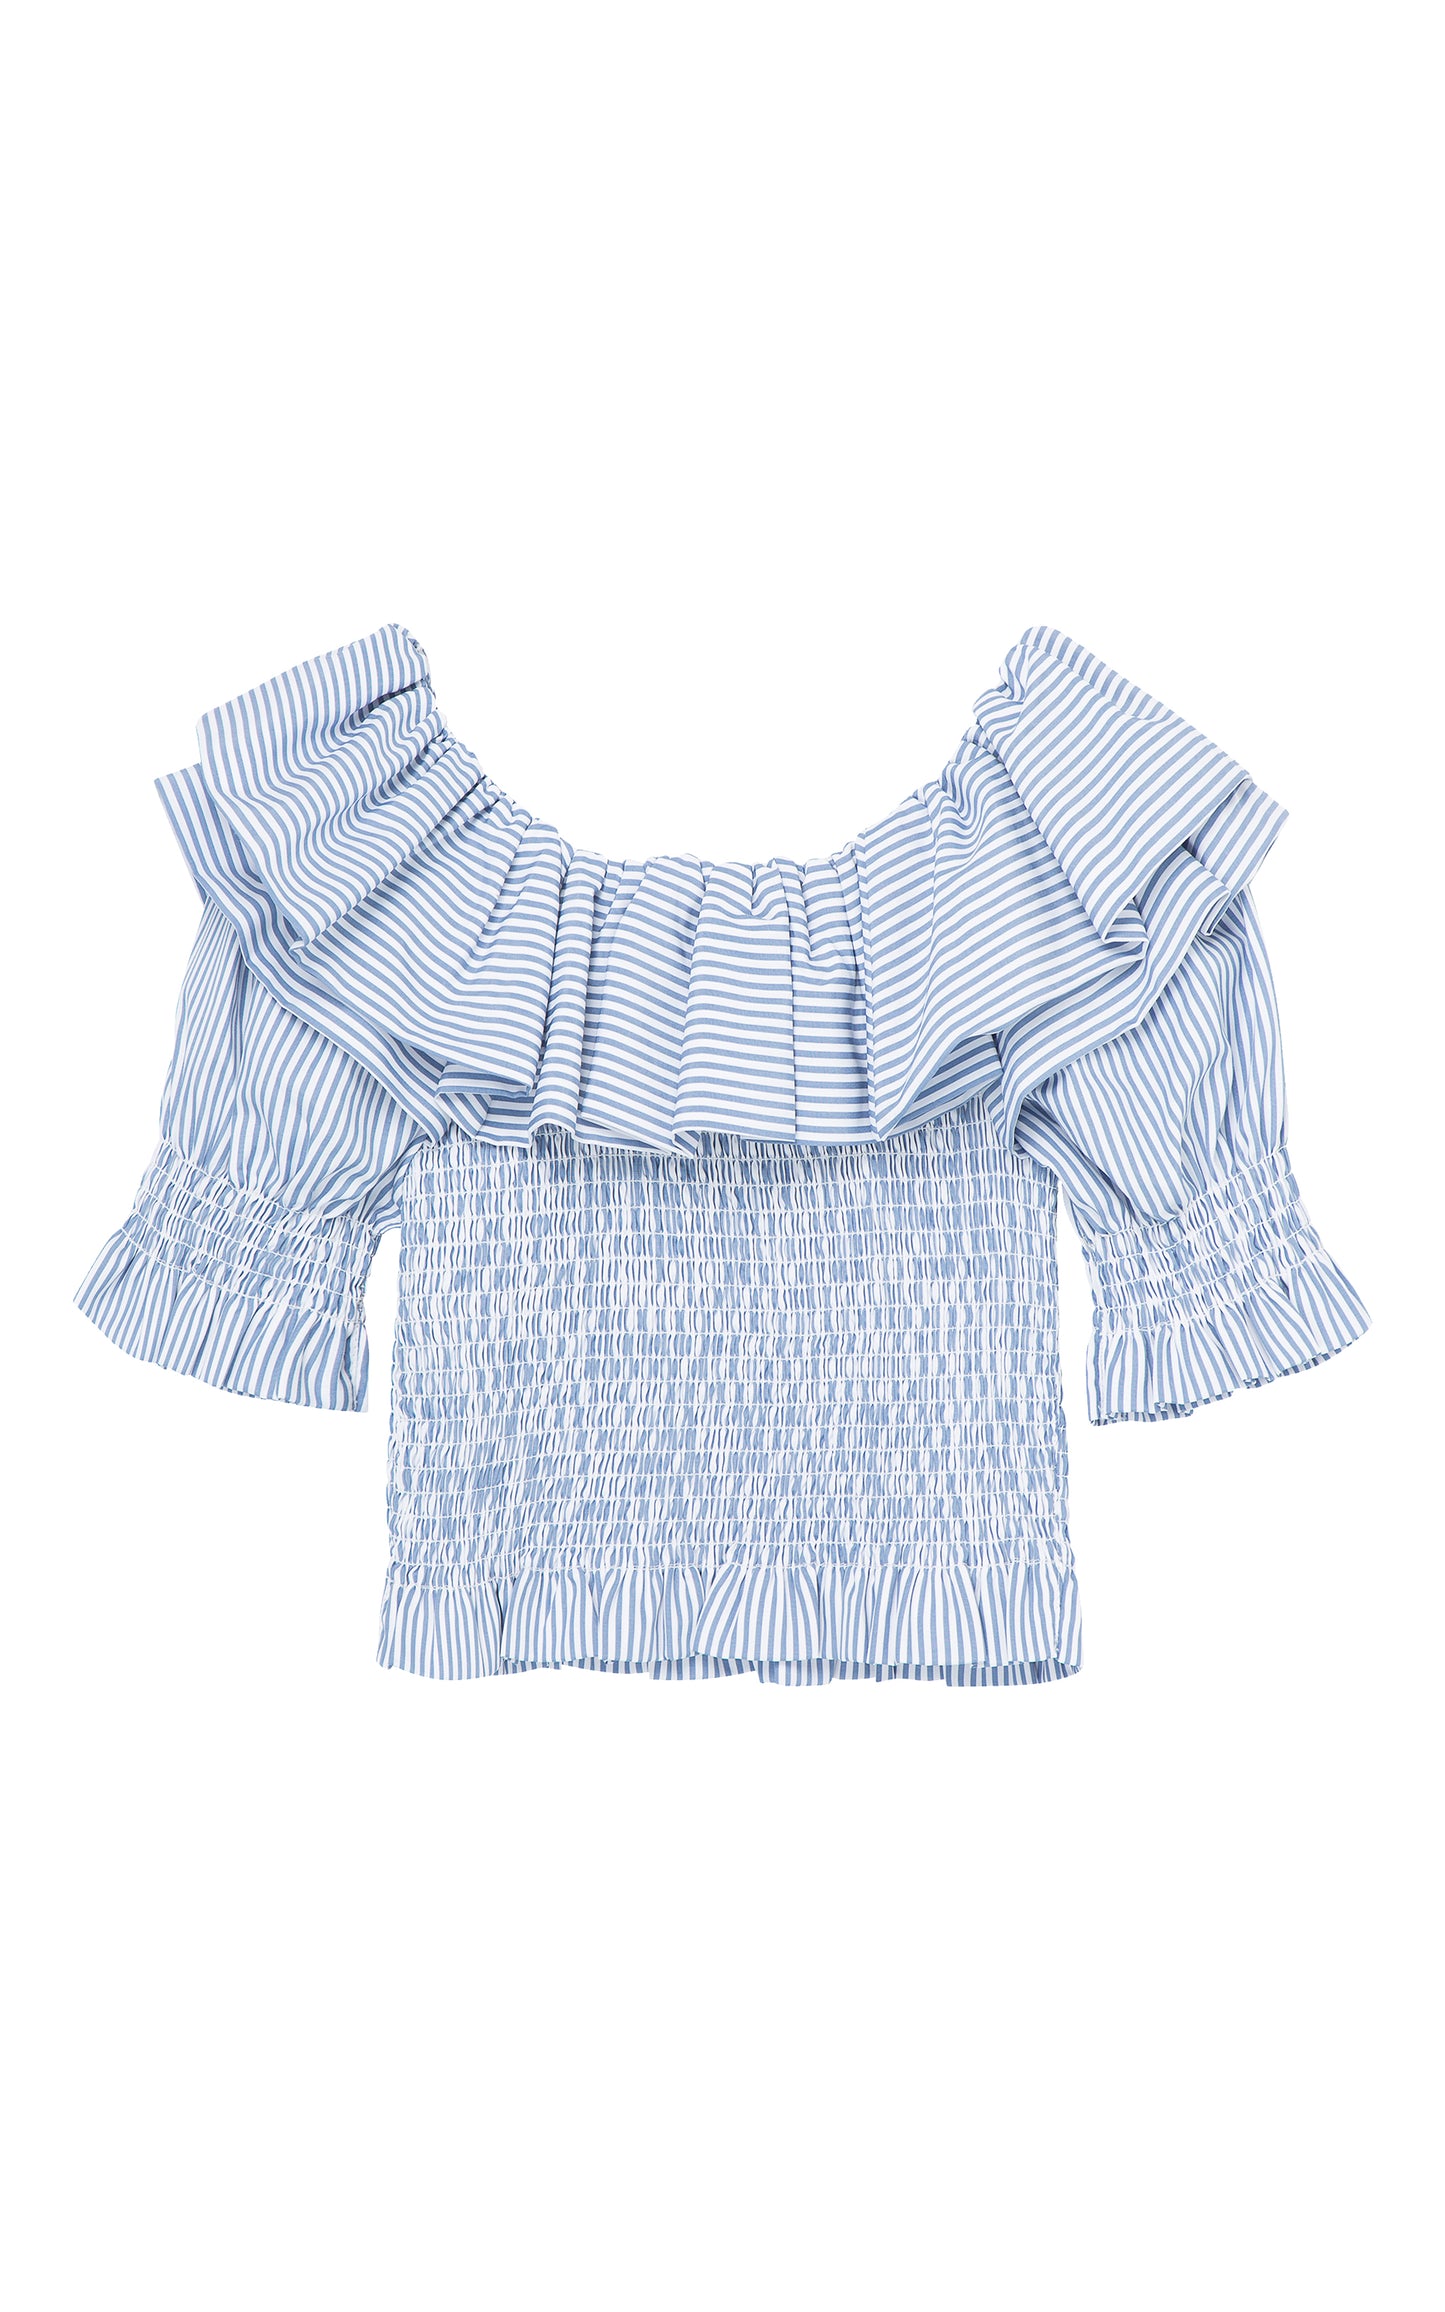 BACK OF BLUE AND WHITE STRIPED THREE-QUARTER-LENGTH SLEEVE TOP WITH A WIDE RUFFLED NECKLINE AND A SMOCKED BODICE